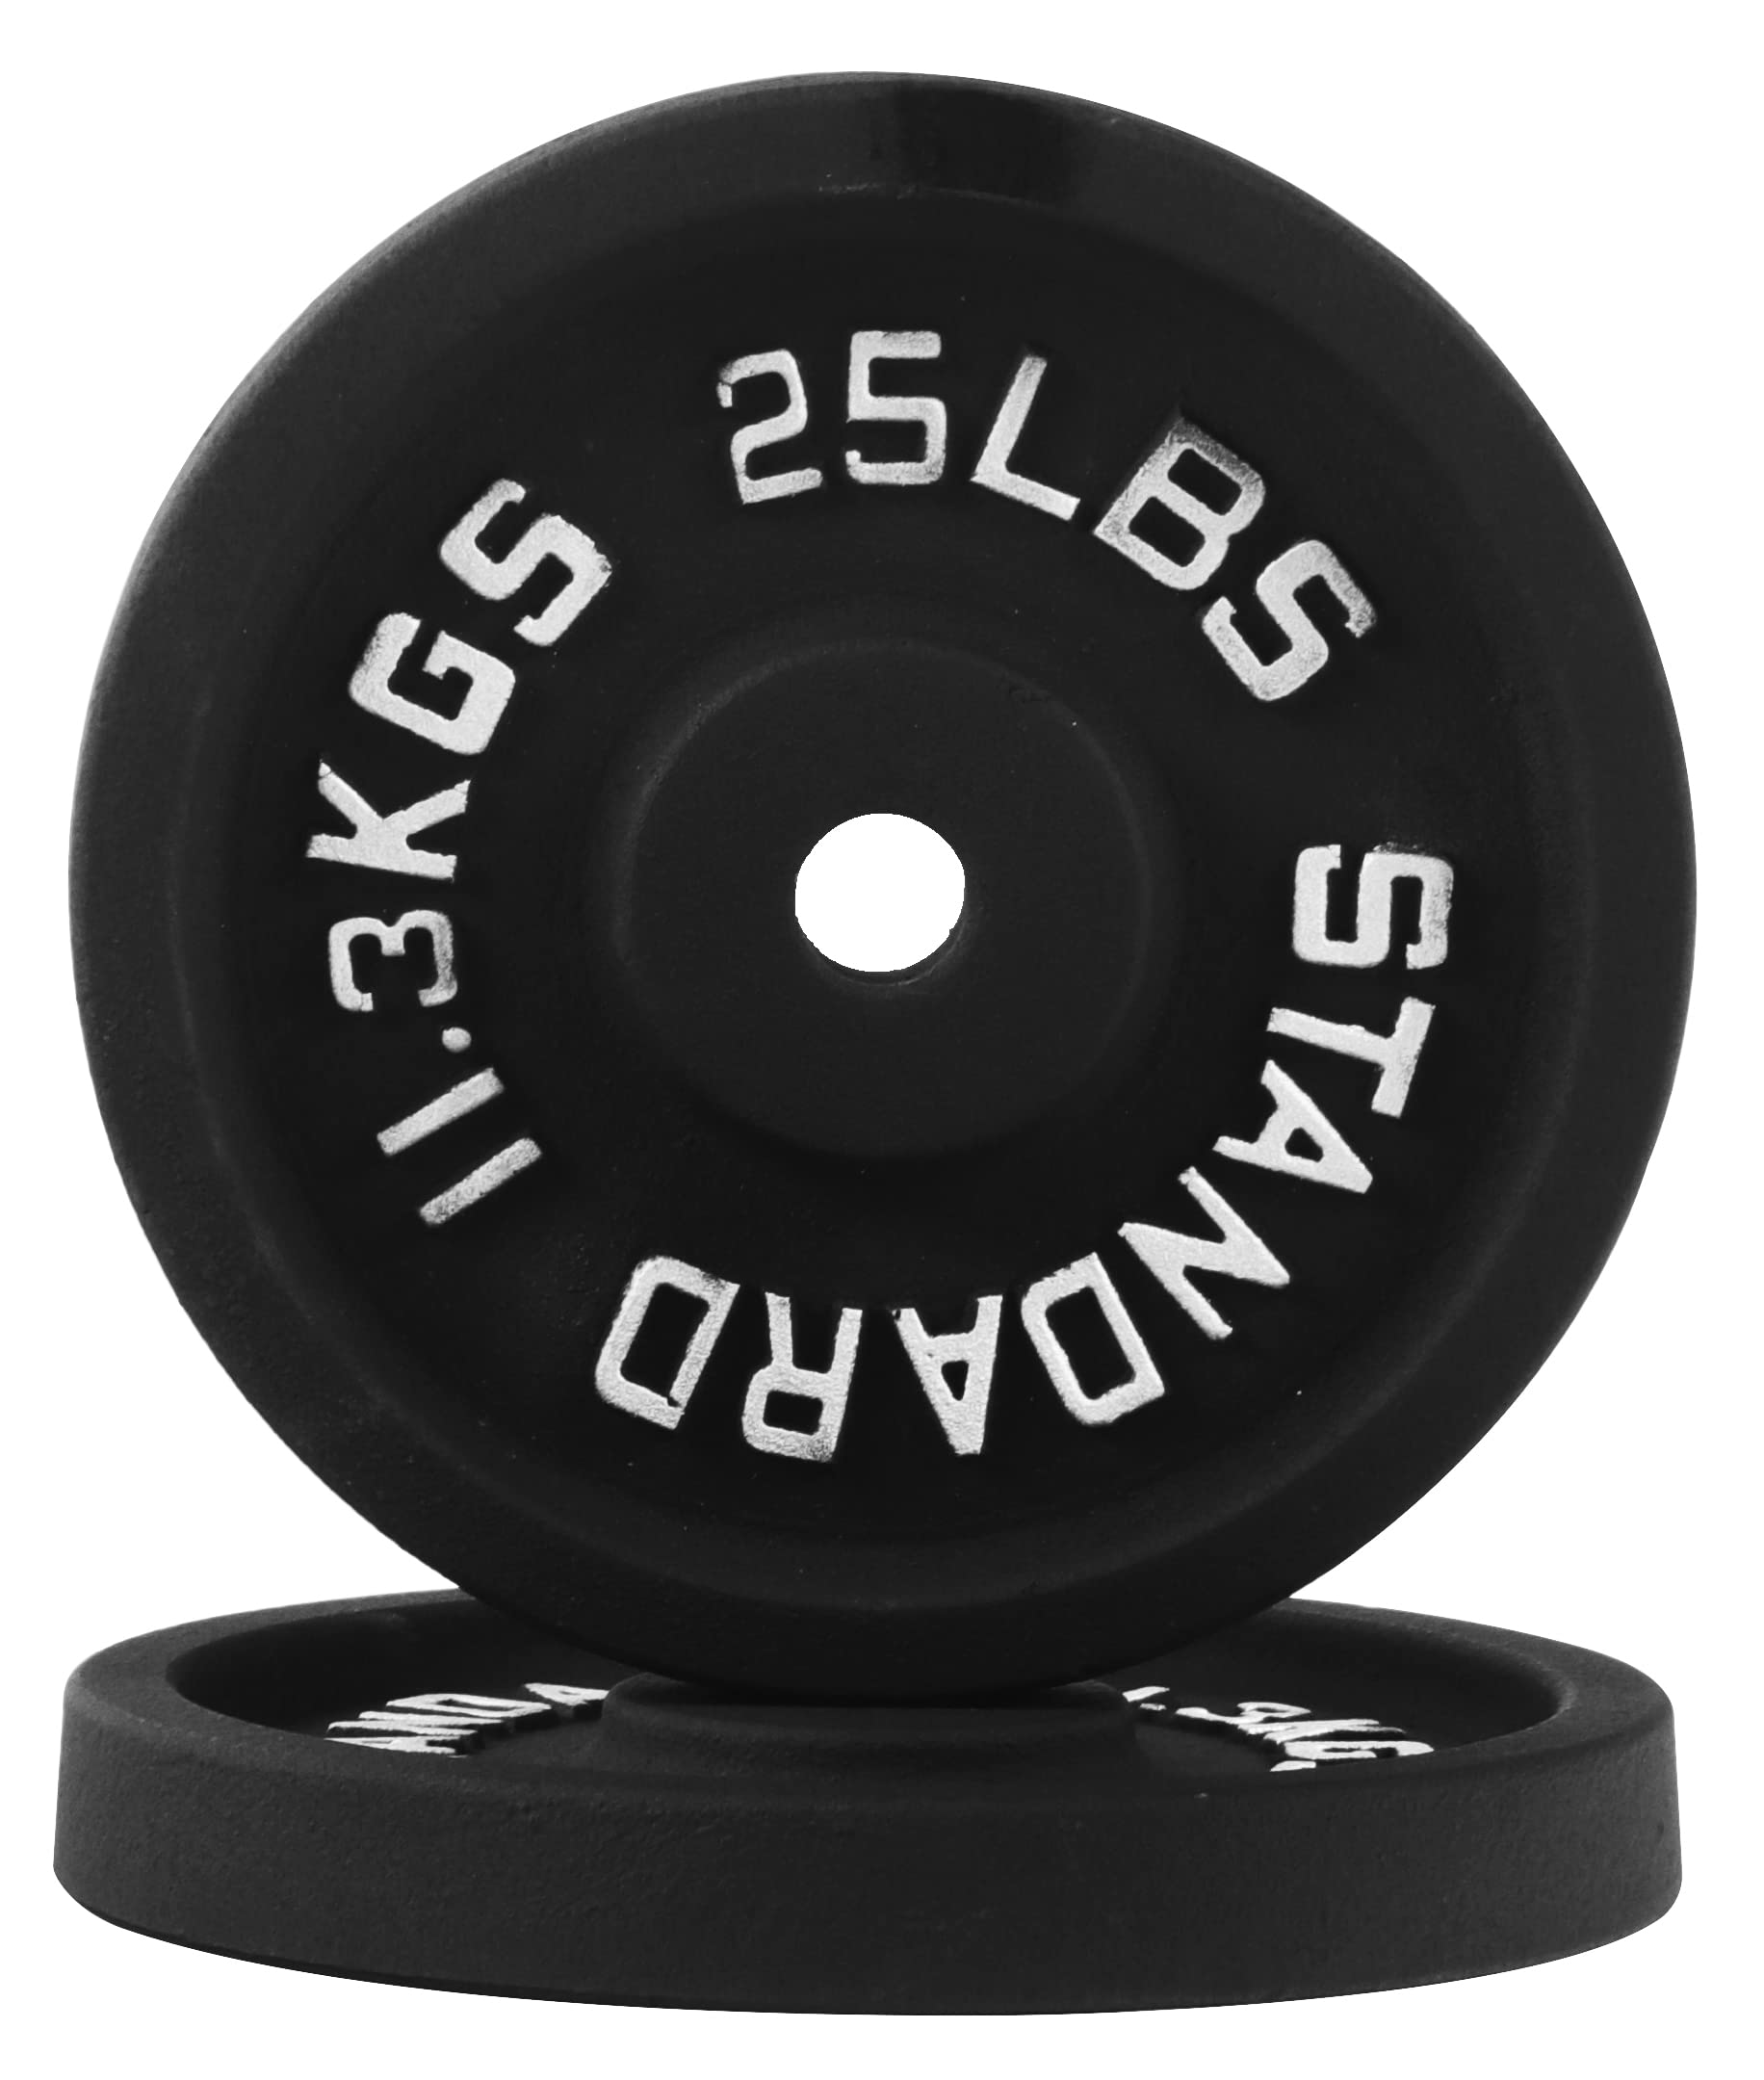 2-Count 25-Lbs Signature Fitness Cast Iron 1" Standard Weight Plate Set $50 + Free Shipping